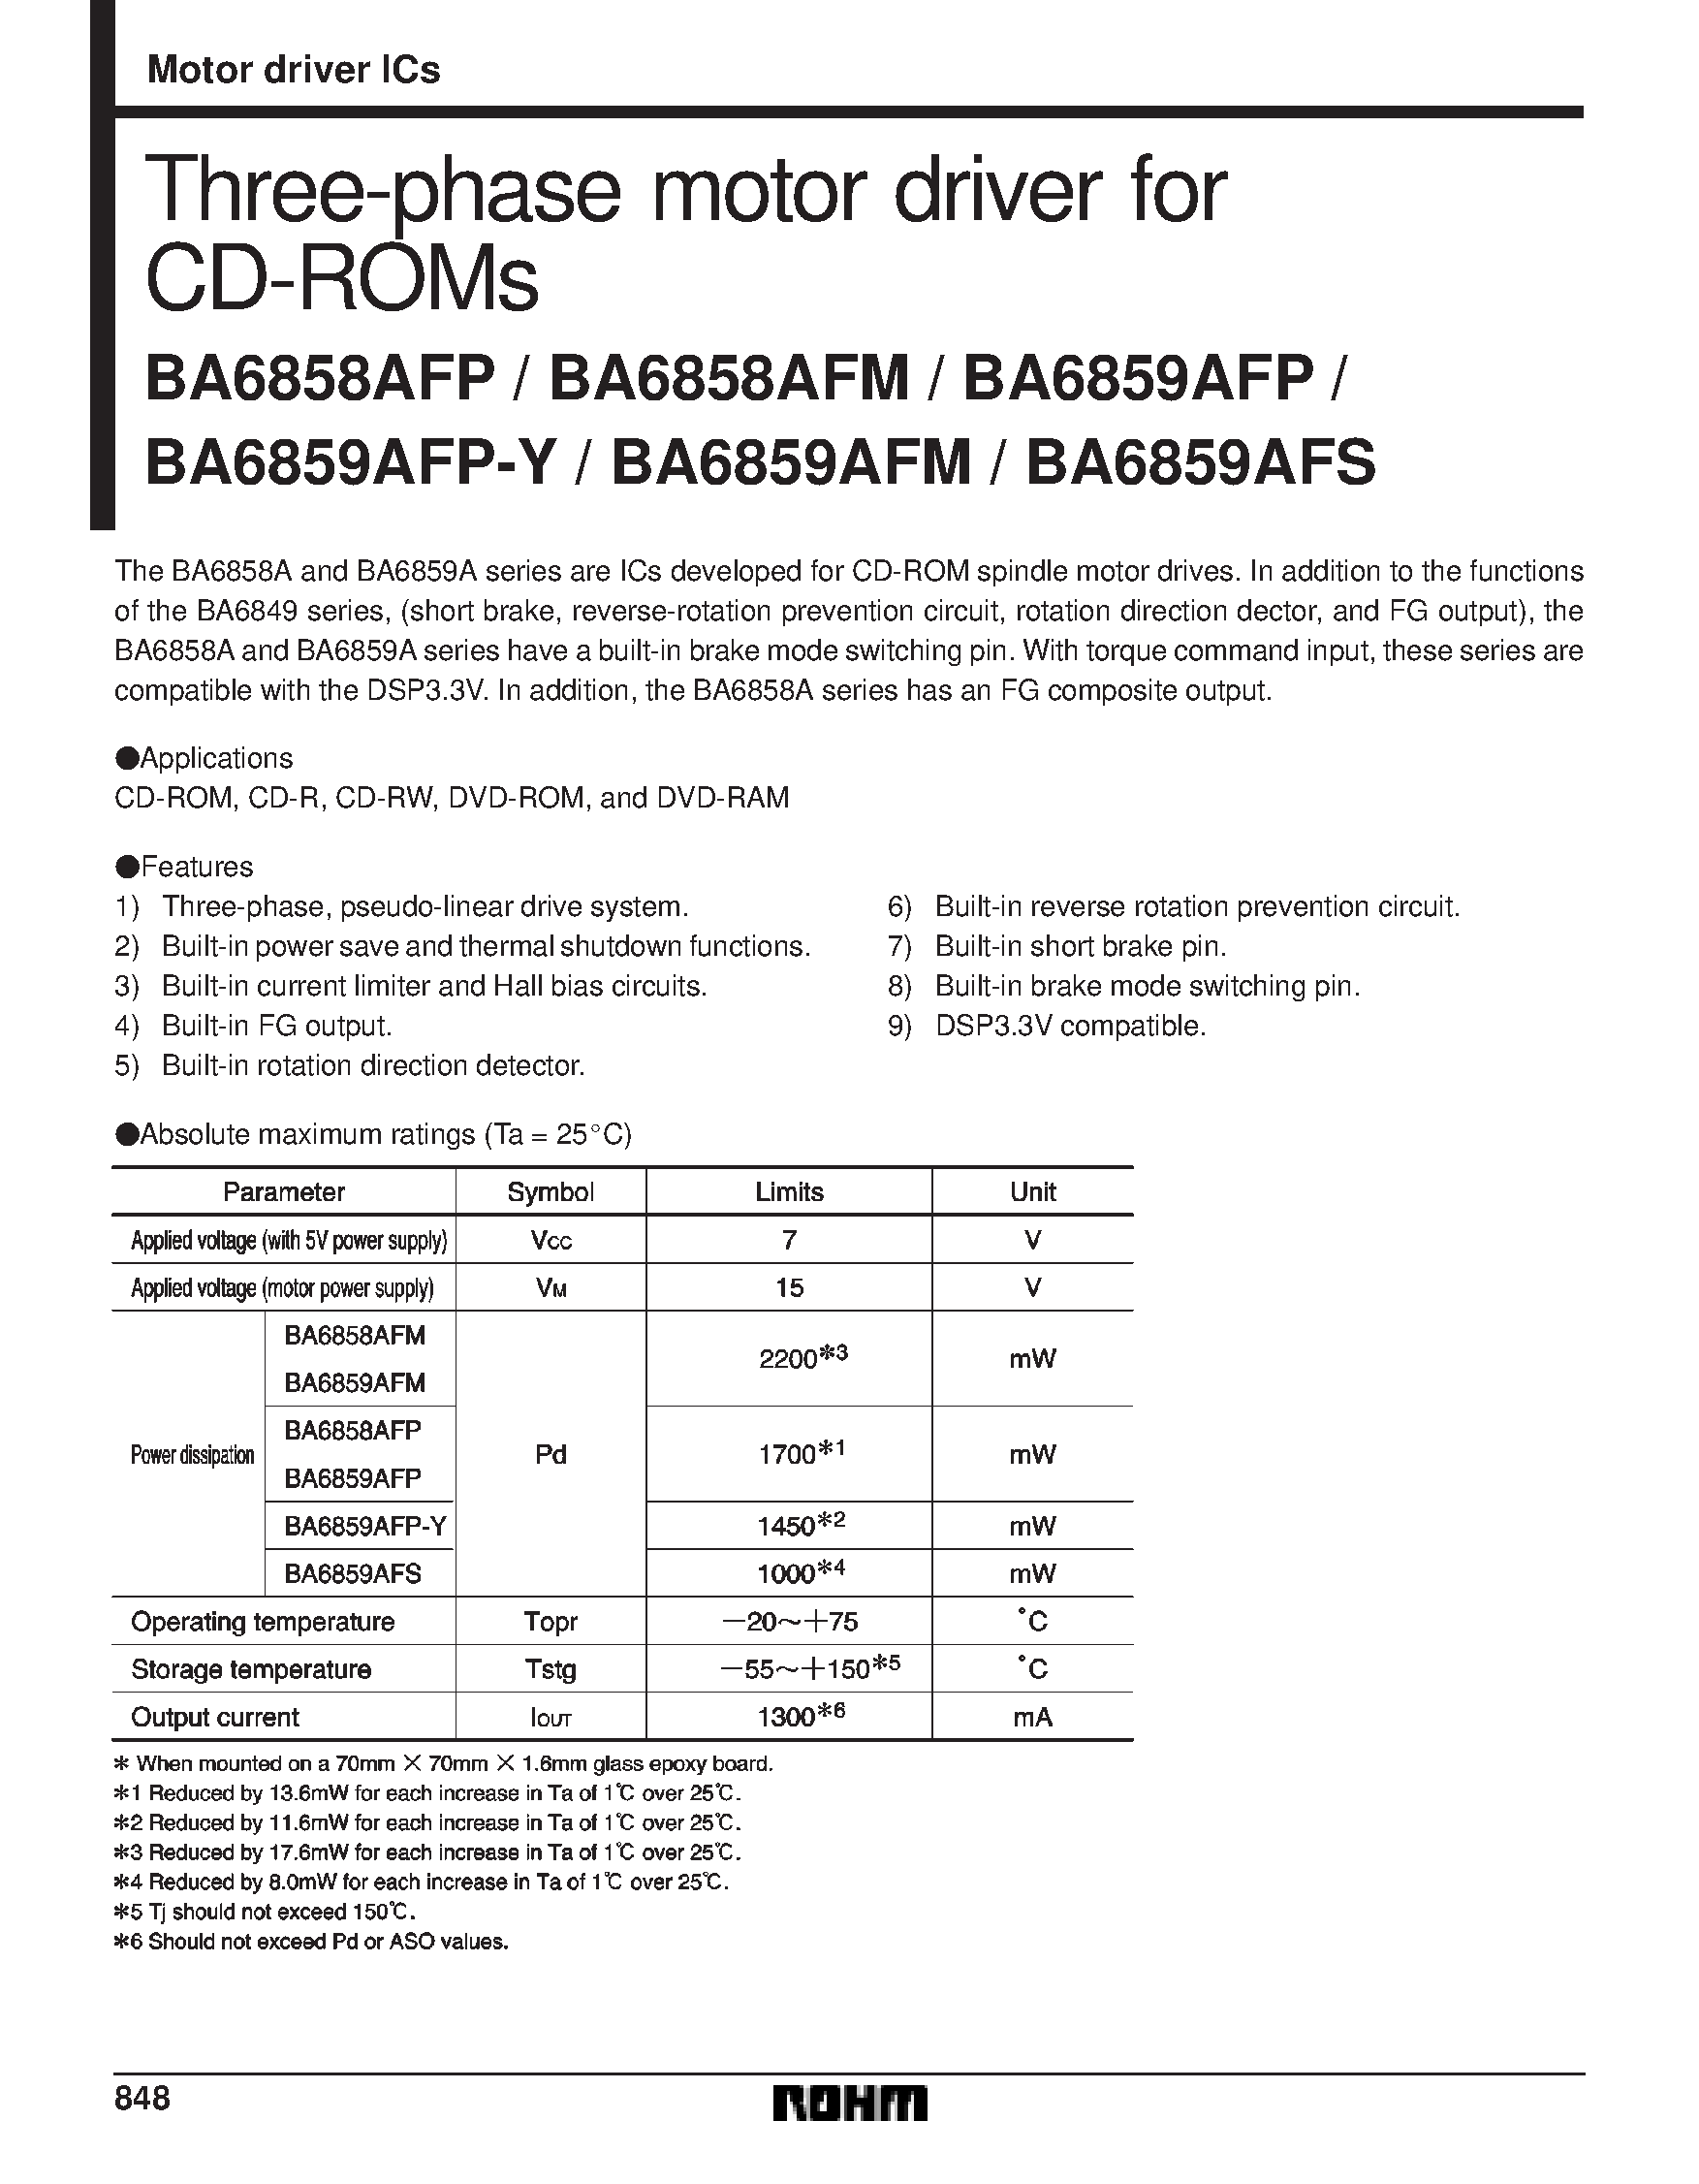 Datasheet BA6859AFP-Y - Three-phase motor driver for CD-ROMs page 1